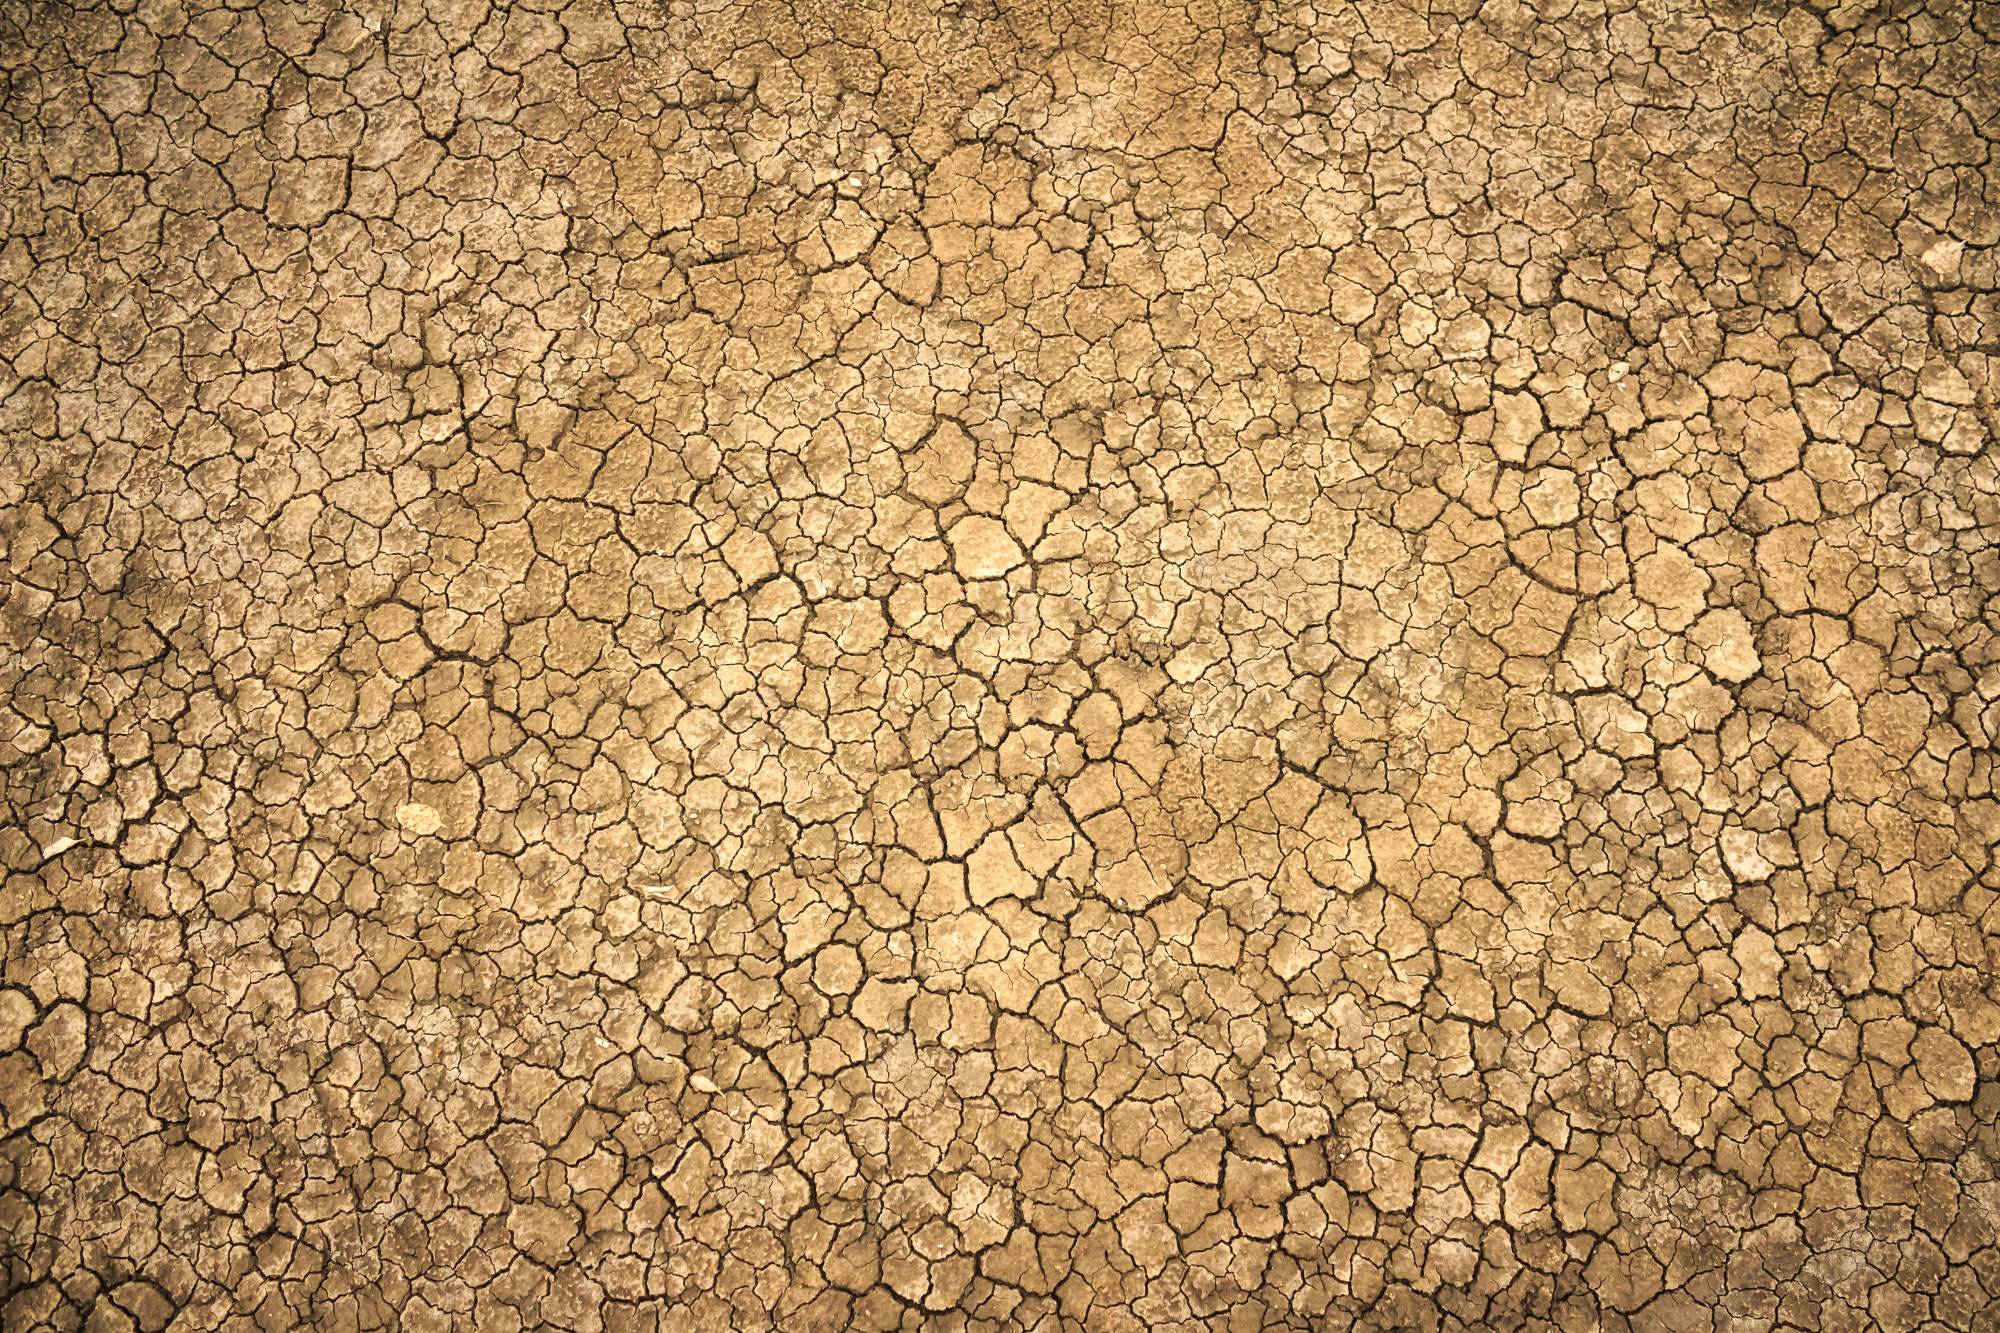 Article: Soil: The Endangered Species Under Your Feet